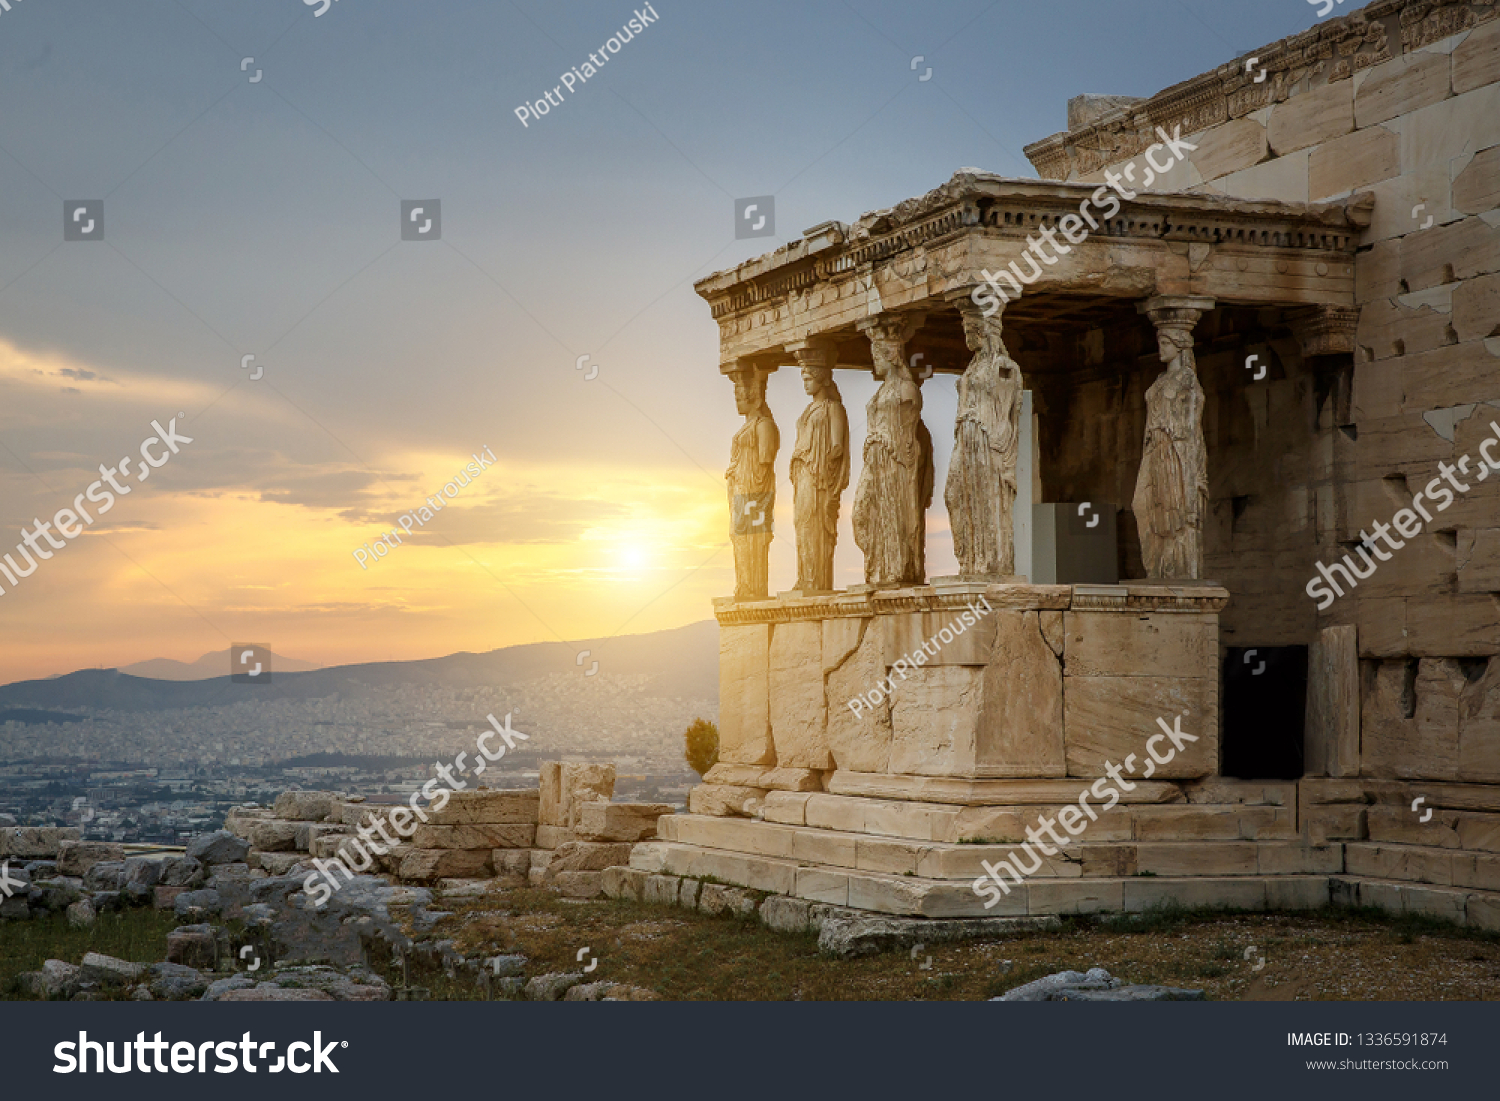 The Caryatids of the Erechtheion. A caryatid is a sculpted female figure serving as an architectural support taking the place of a column or a pillar supporting an entablature on her head. #1336591874